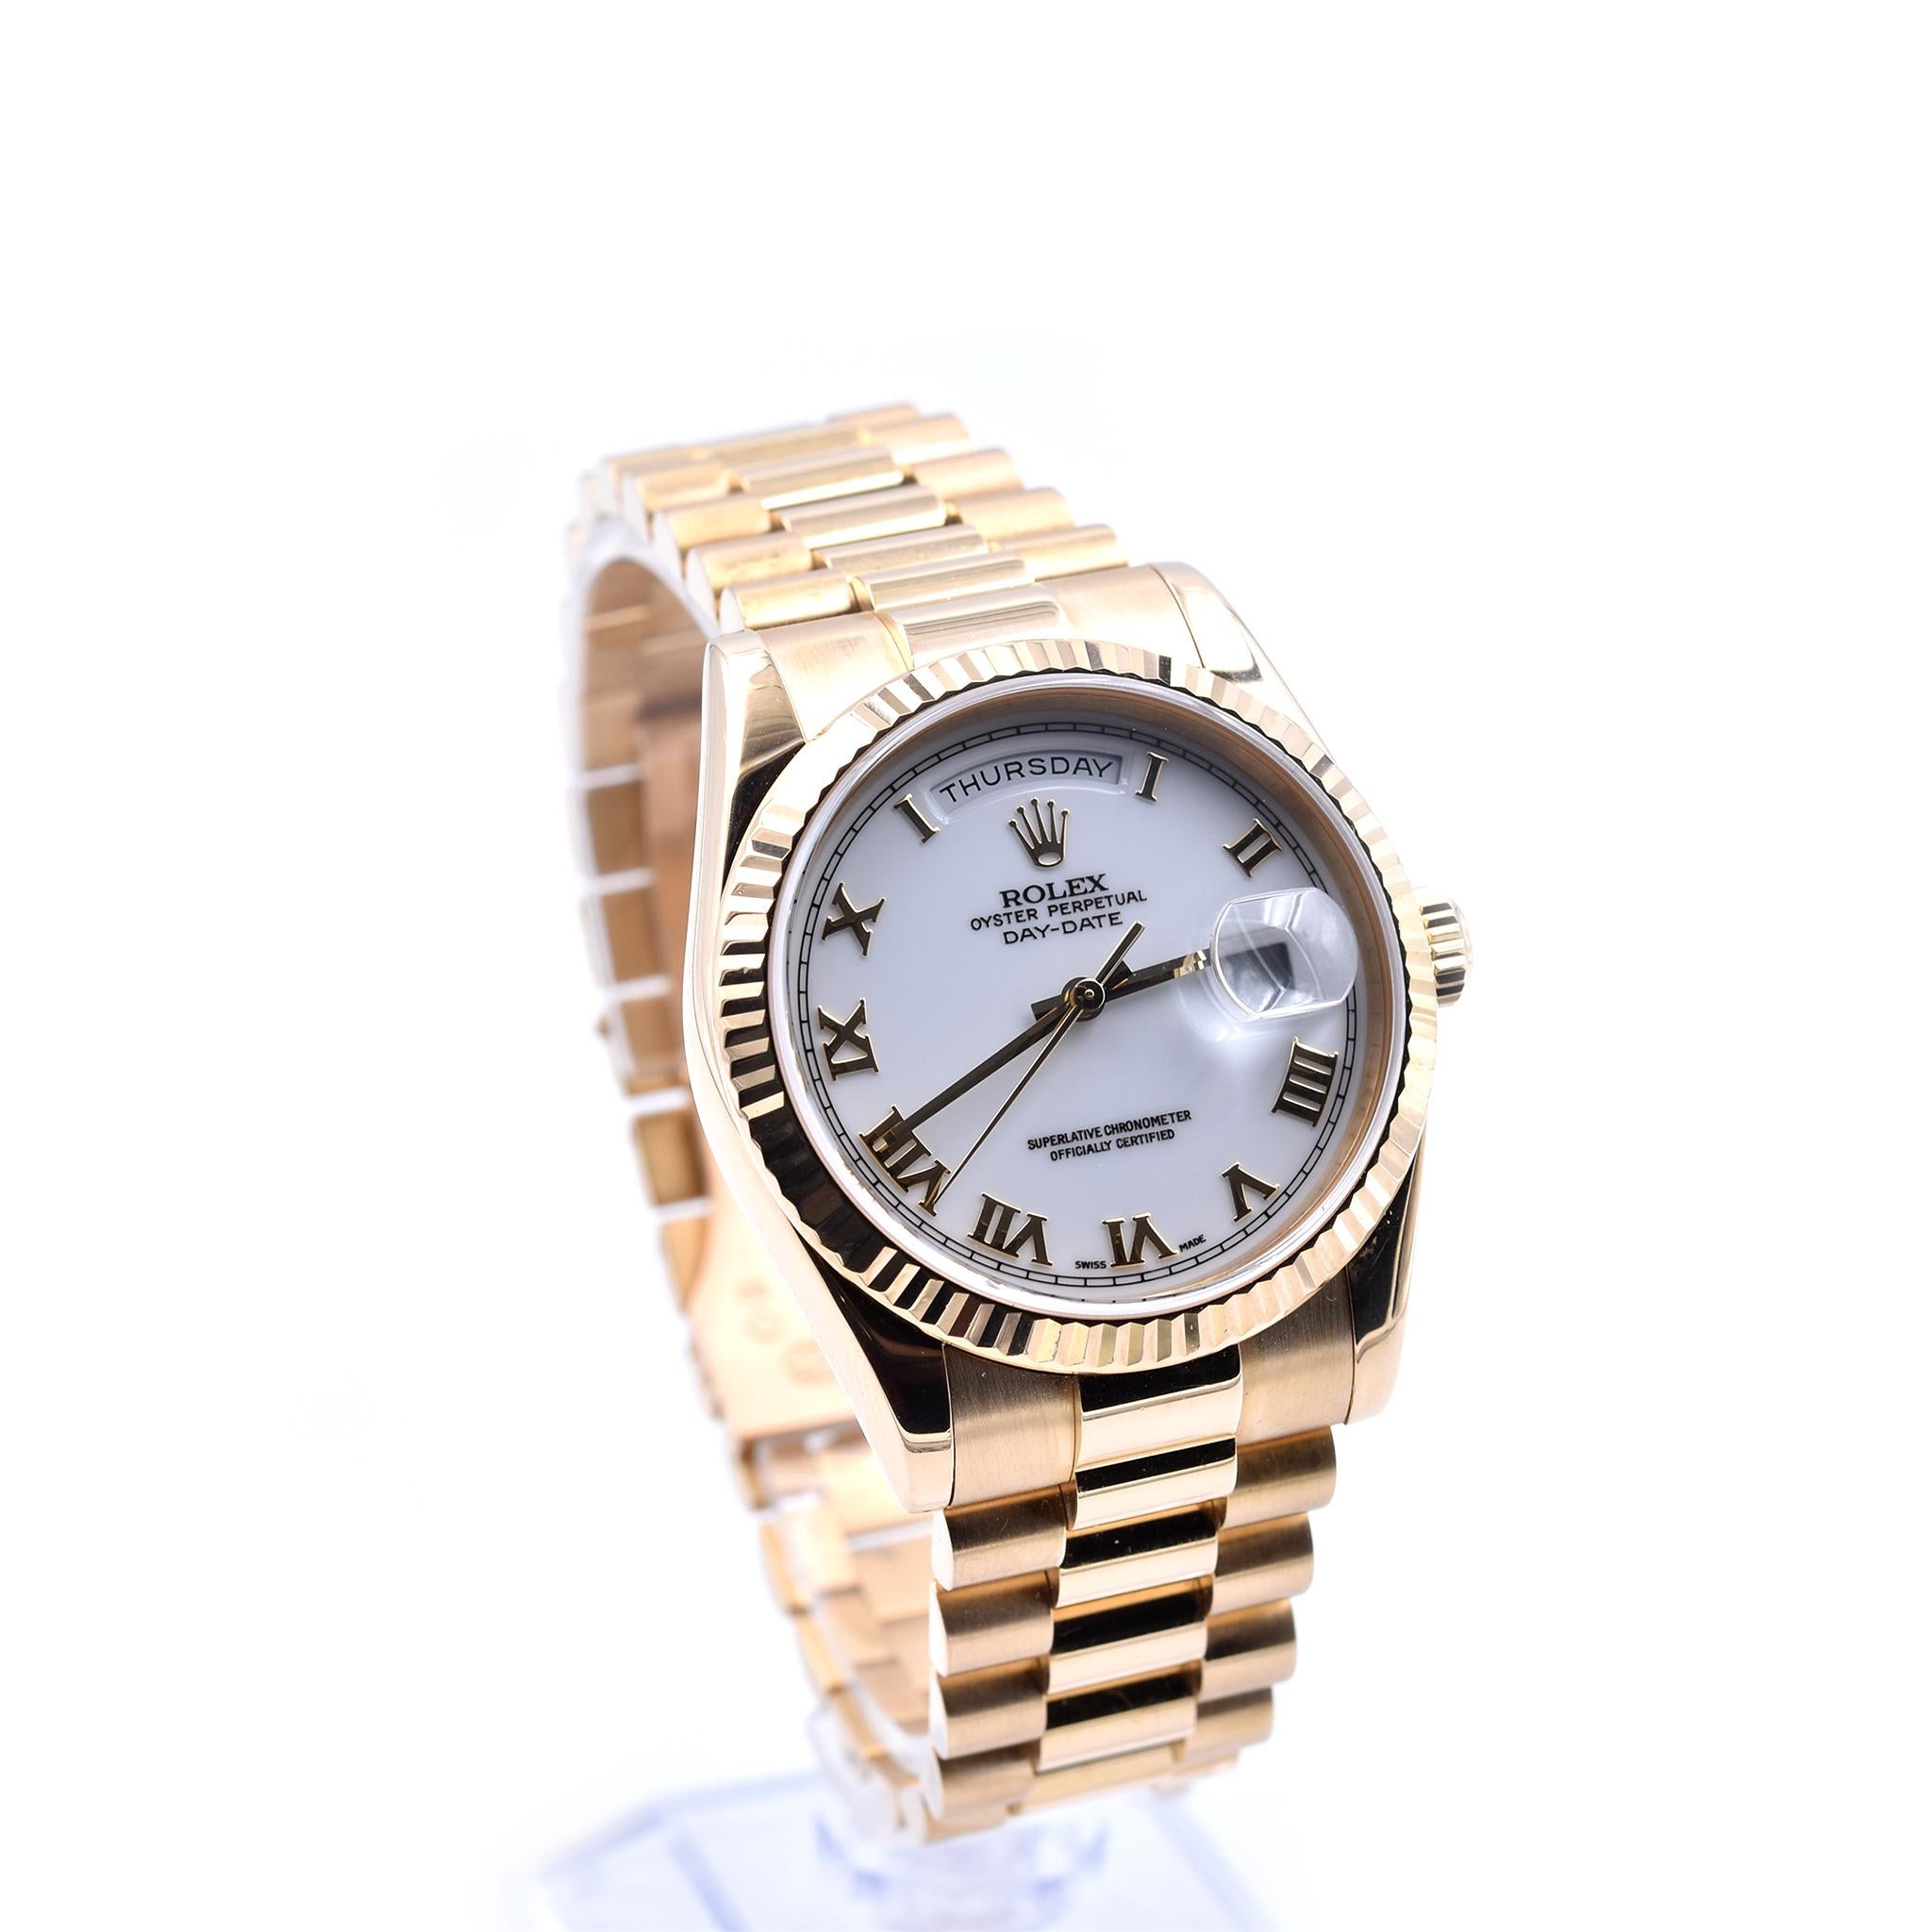 Movement: automatic 3155 movement
Function: hours, minutes, sweep seconds, date, day
Case: 36mm 18k yellow gold case, screw-down crown, sapphire crystal, 18k yellow gold fluted bezel, waterproof to 100 meters
Band: 18k yellow gold president bracelet